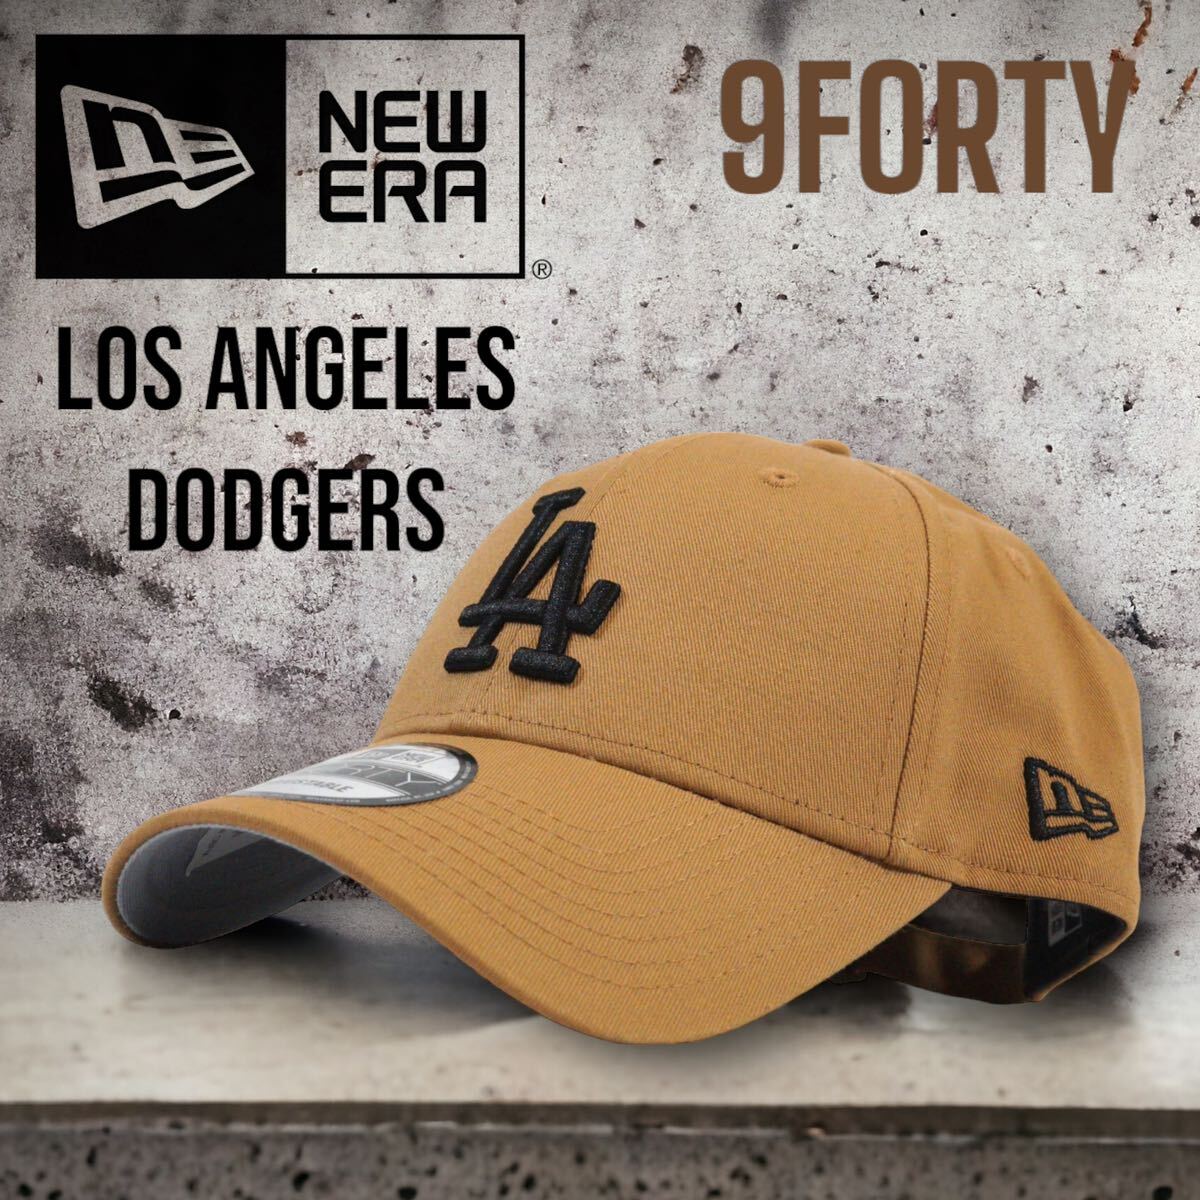 * not yet sale in Japan *NewEra Los Angeles Dodgers 9FORTY Strapback Cap we to color / New Era car b cap large . sho flat doja-s